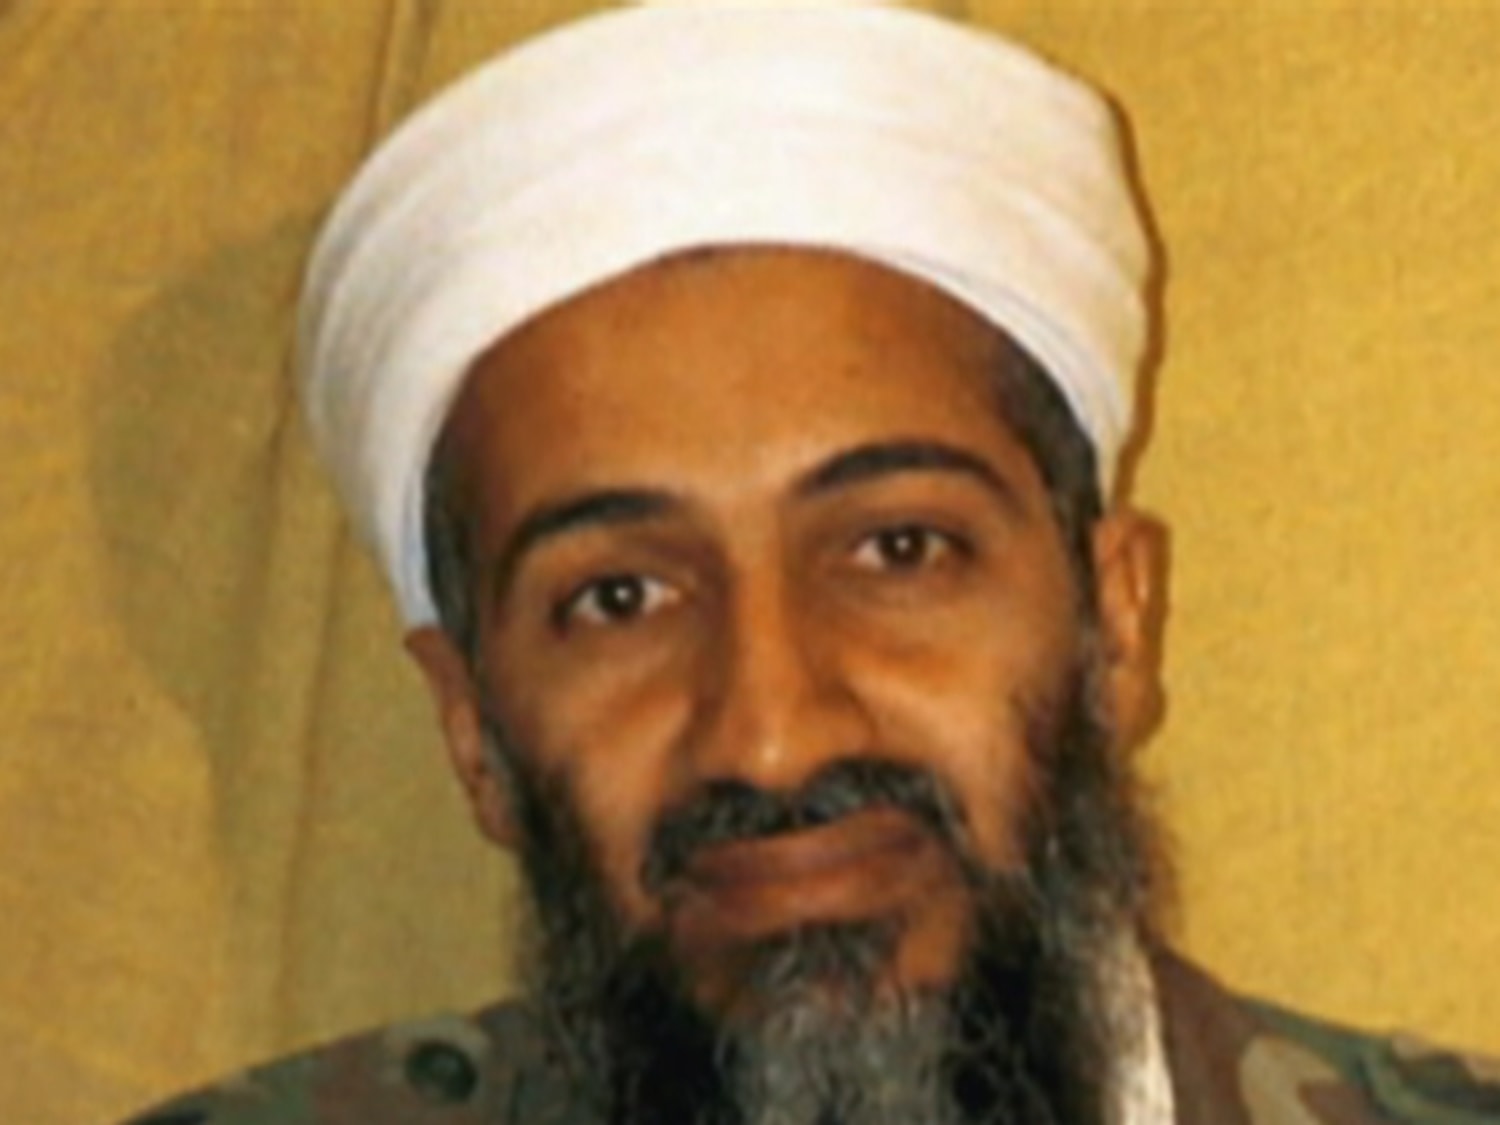 Pakistani Asset Helped in Hunt for Bin Laden, Sources Say